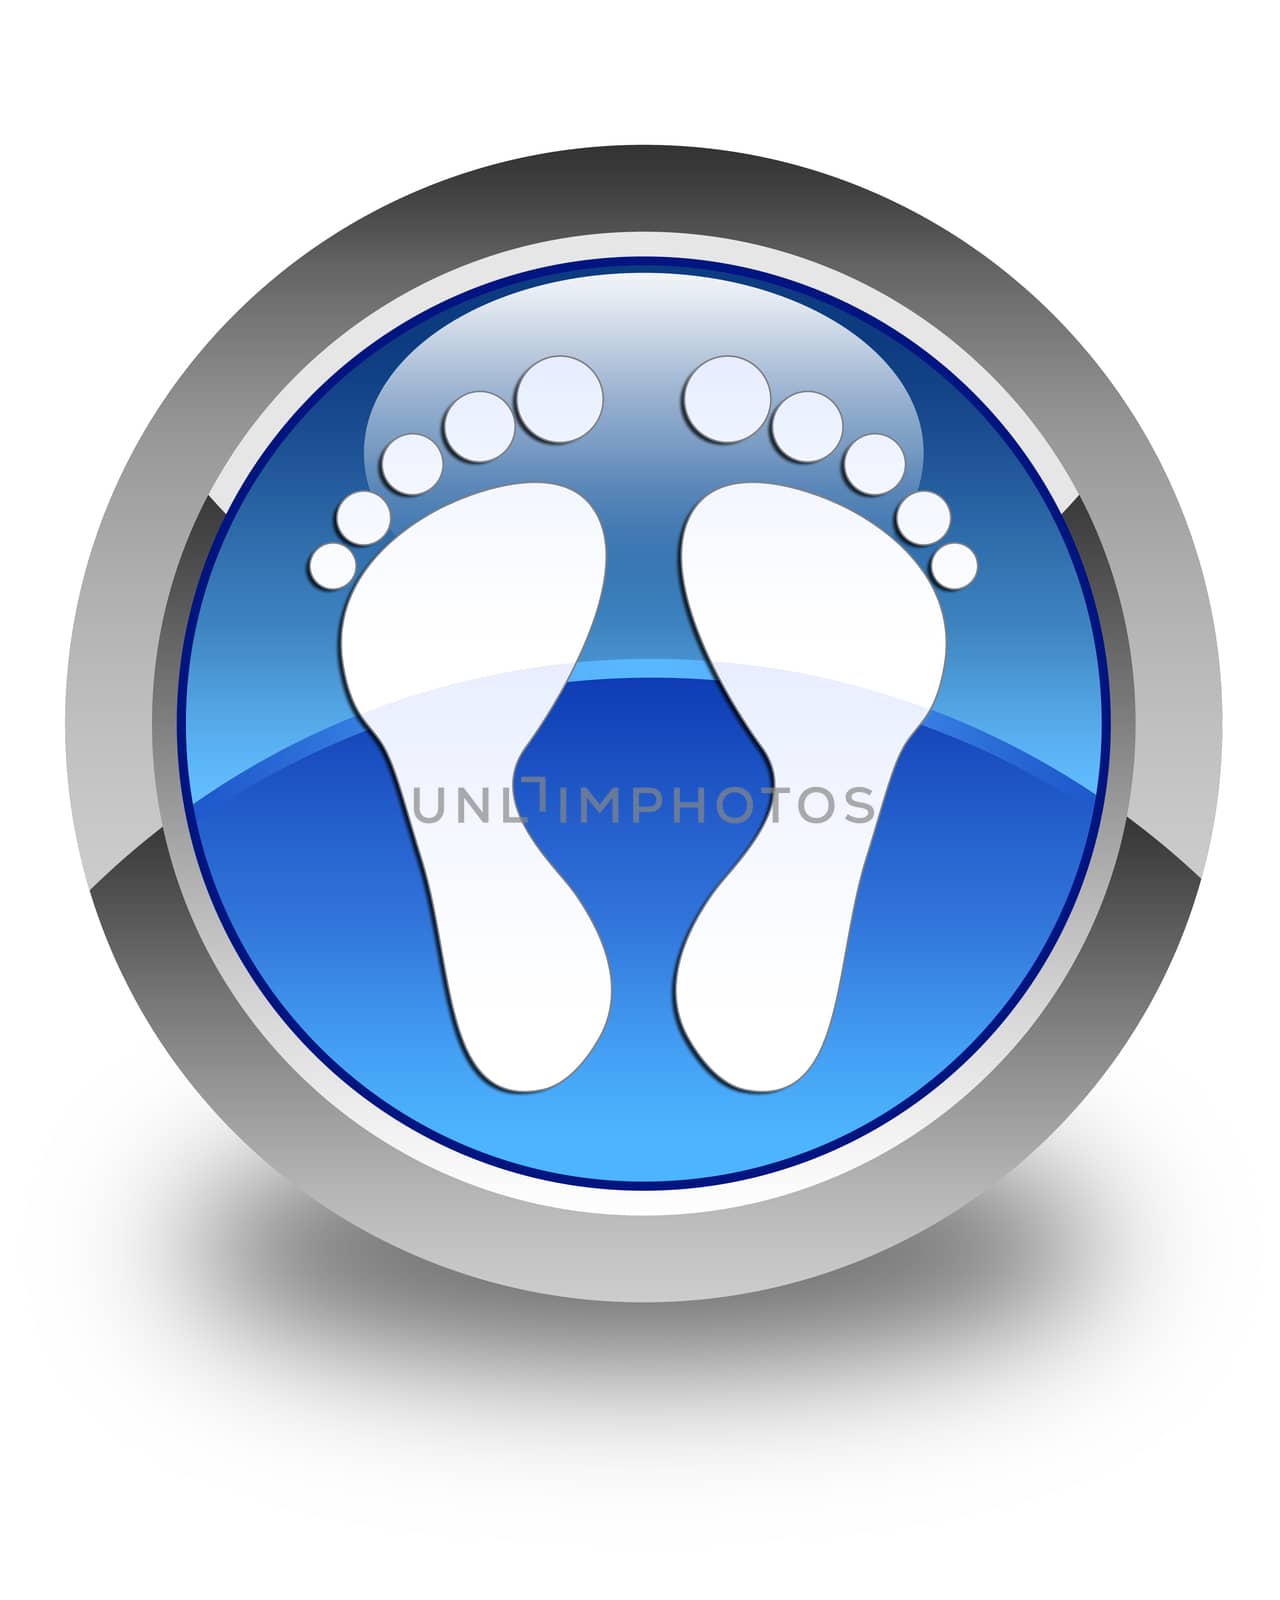 Footprint icon glossy blue round button